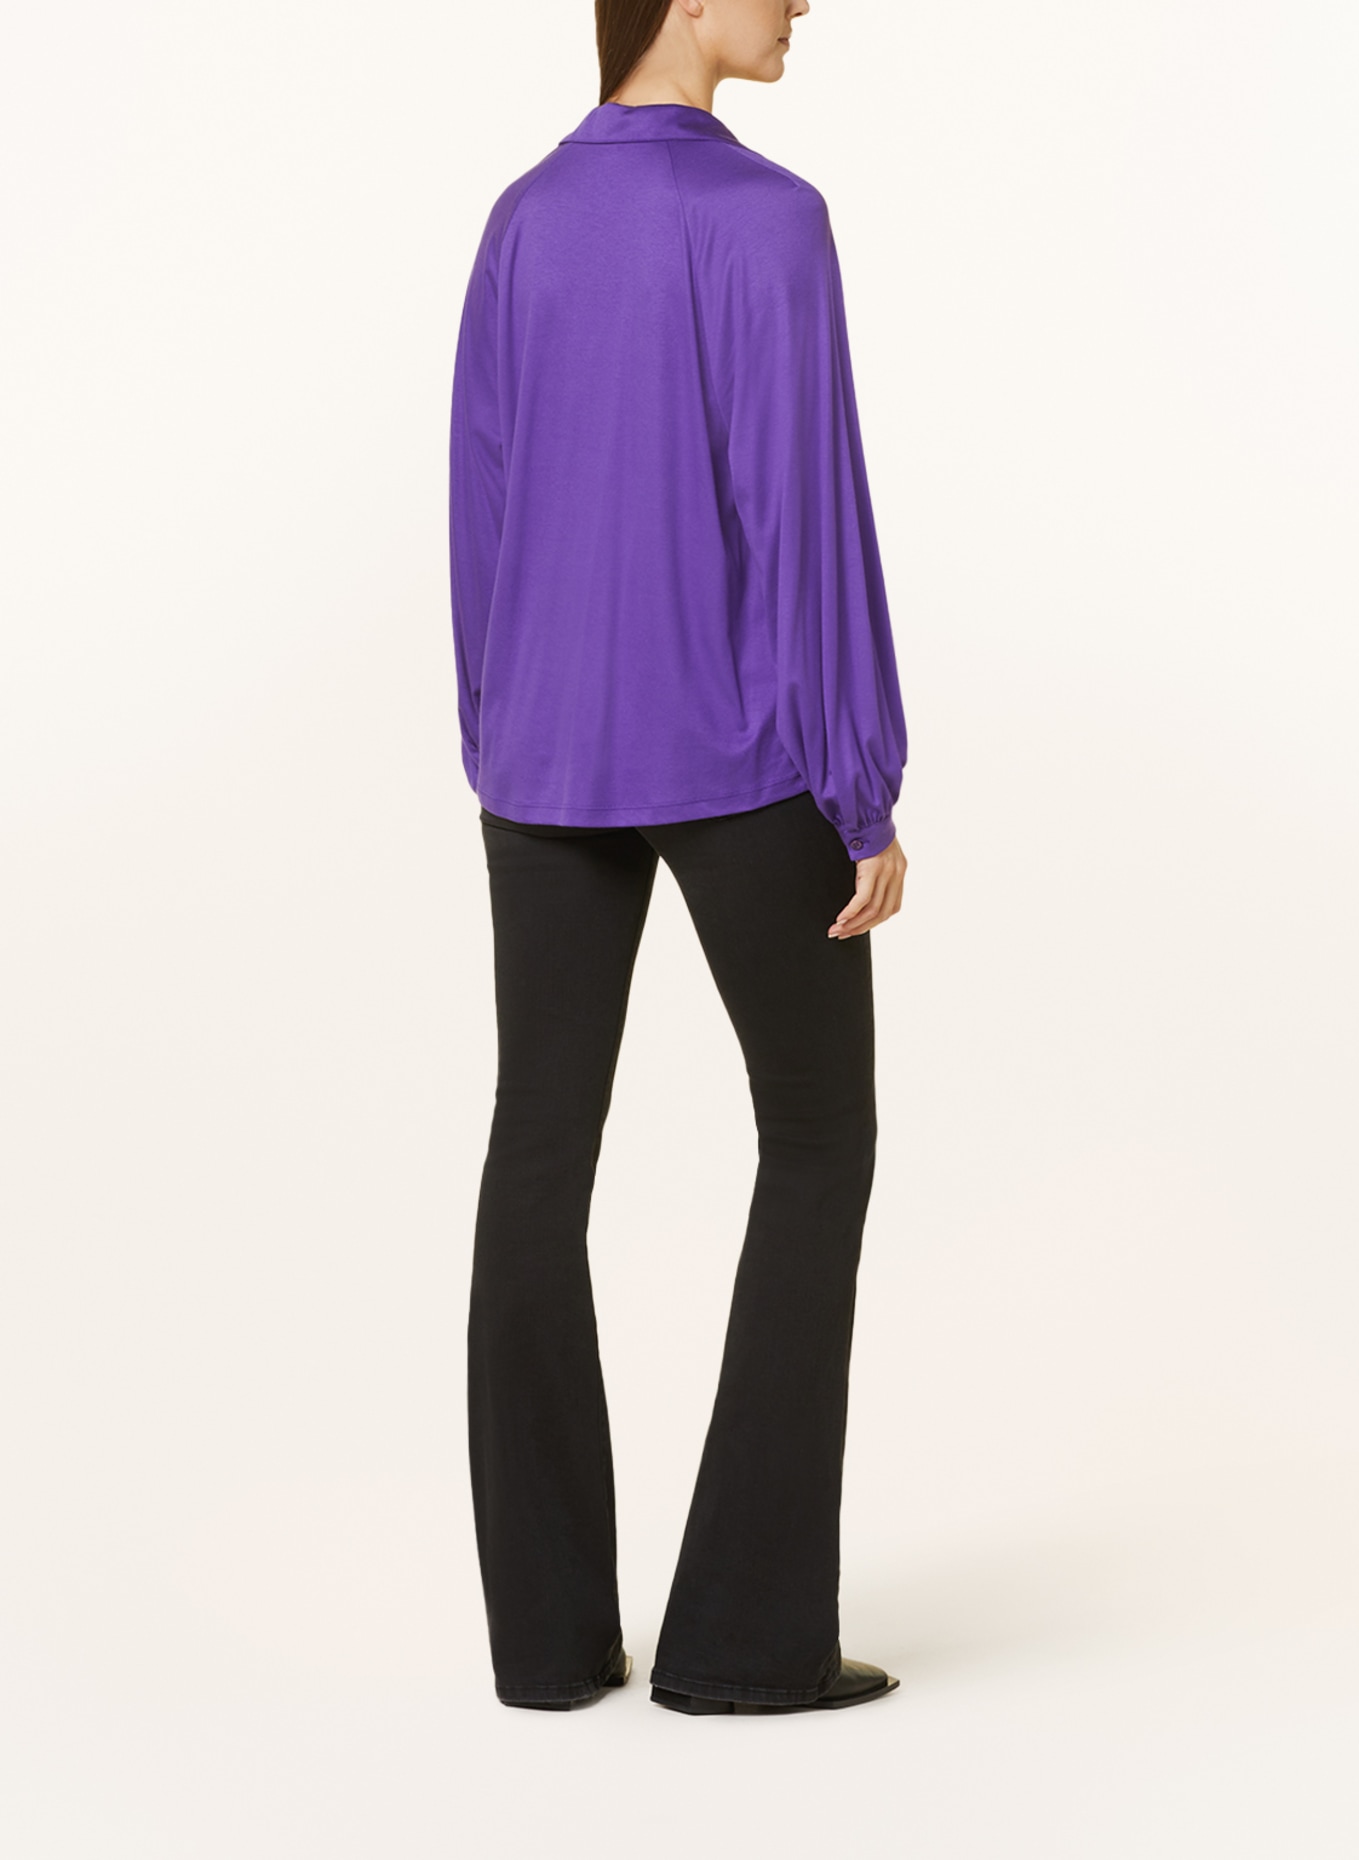 DESOTO Shirt blouse LUCY made of jersey, Color: PURPLE (Image 3)